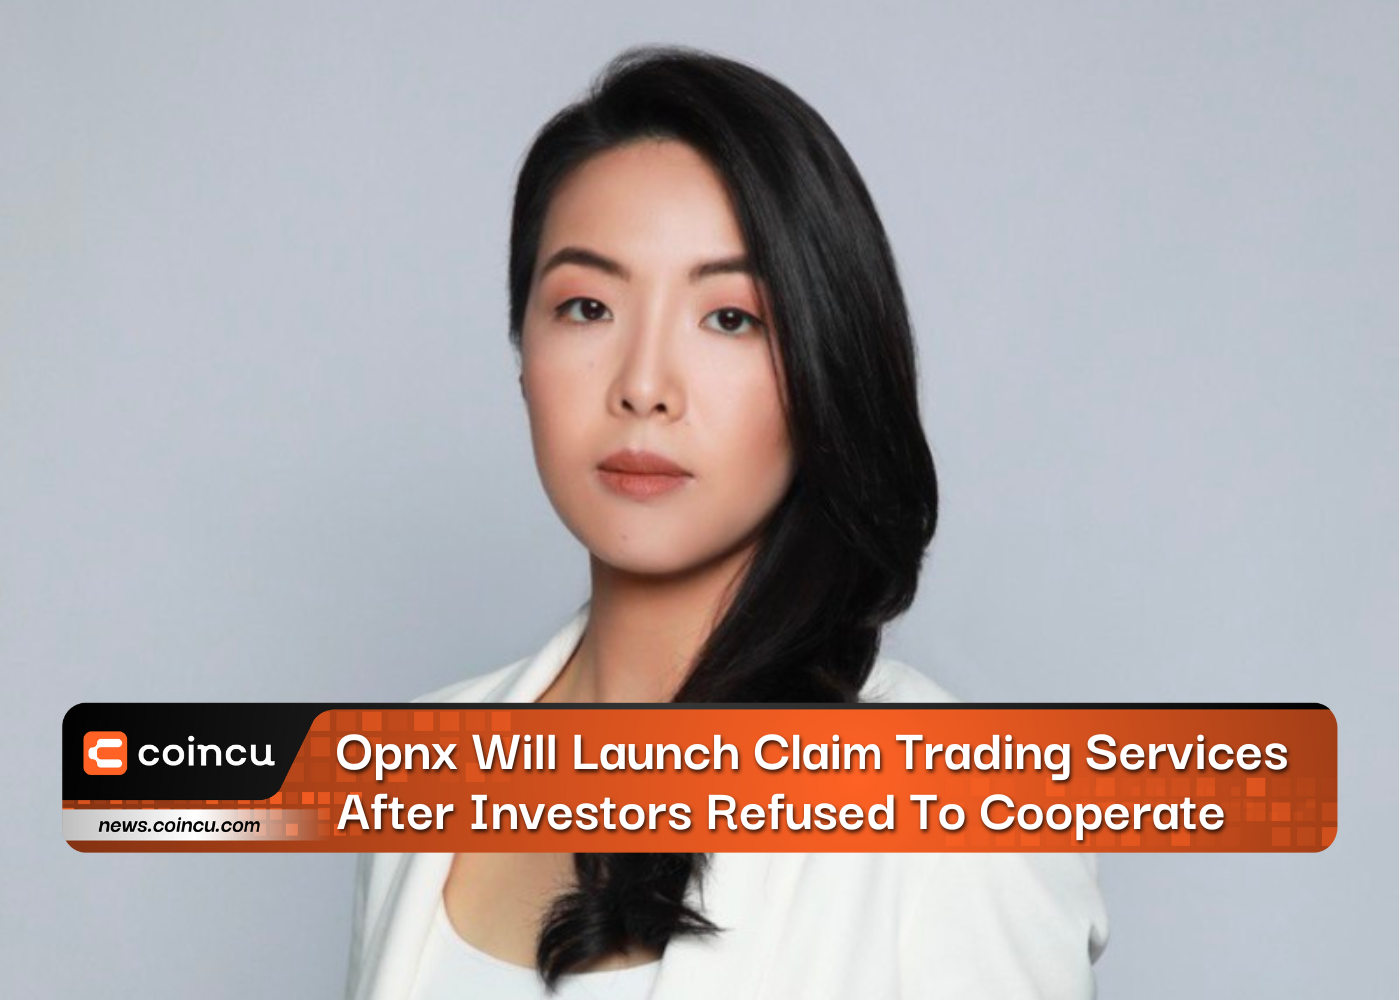 OPNX Will Launch Claim Trading Services After Investors Refused To Cooperate